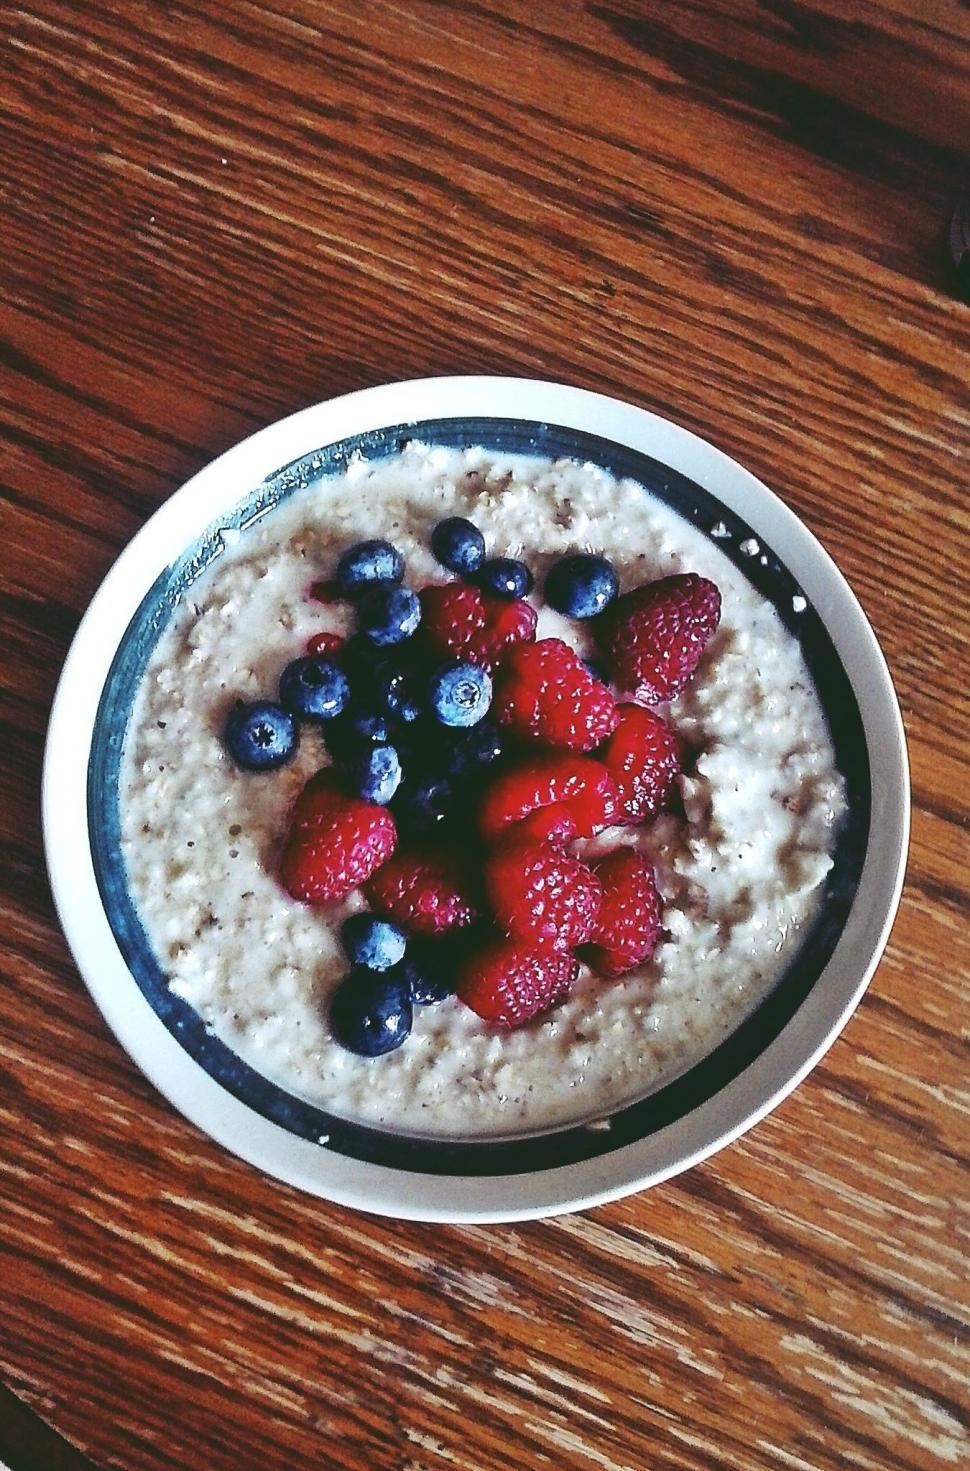 Free Image of Oatmeal with Fruits  